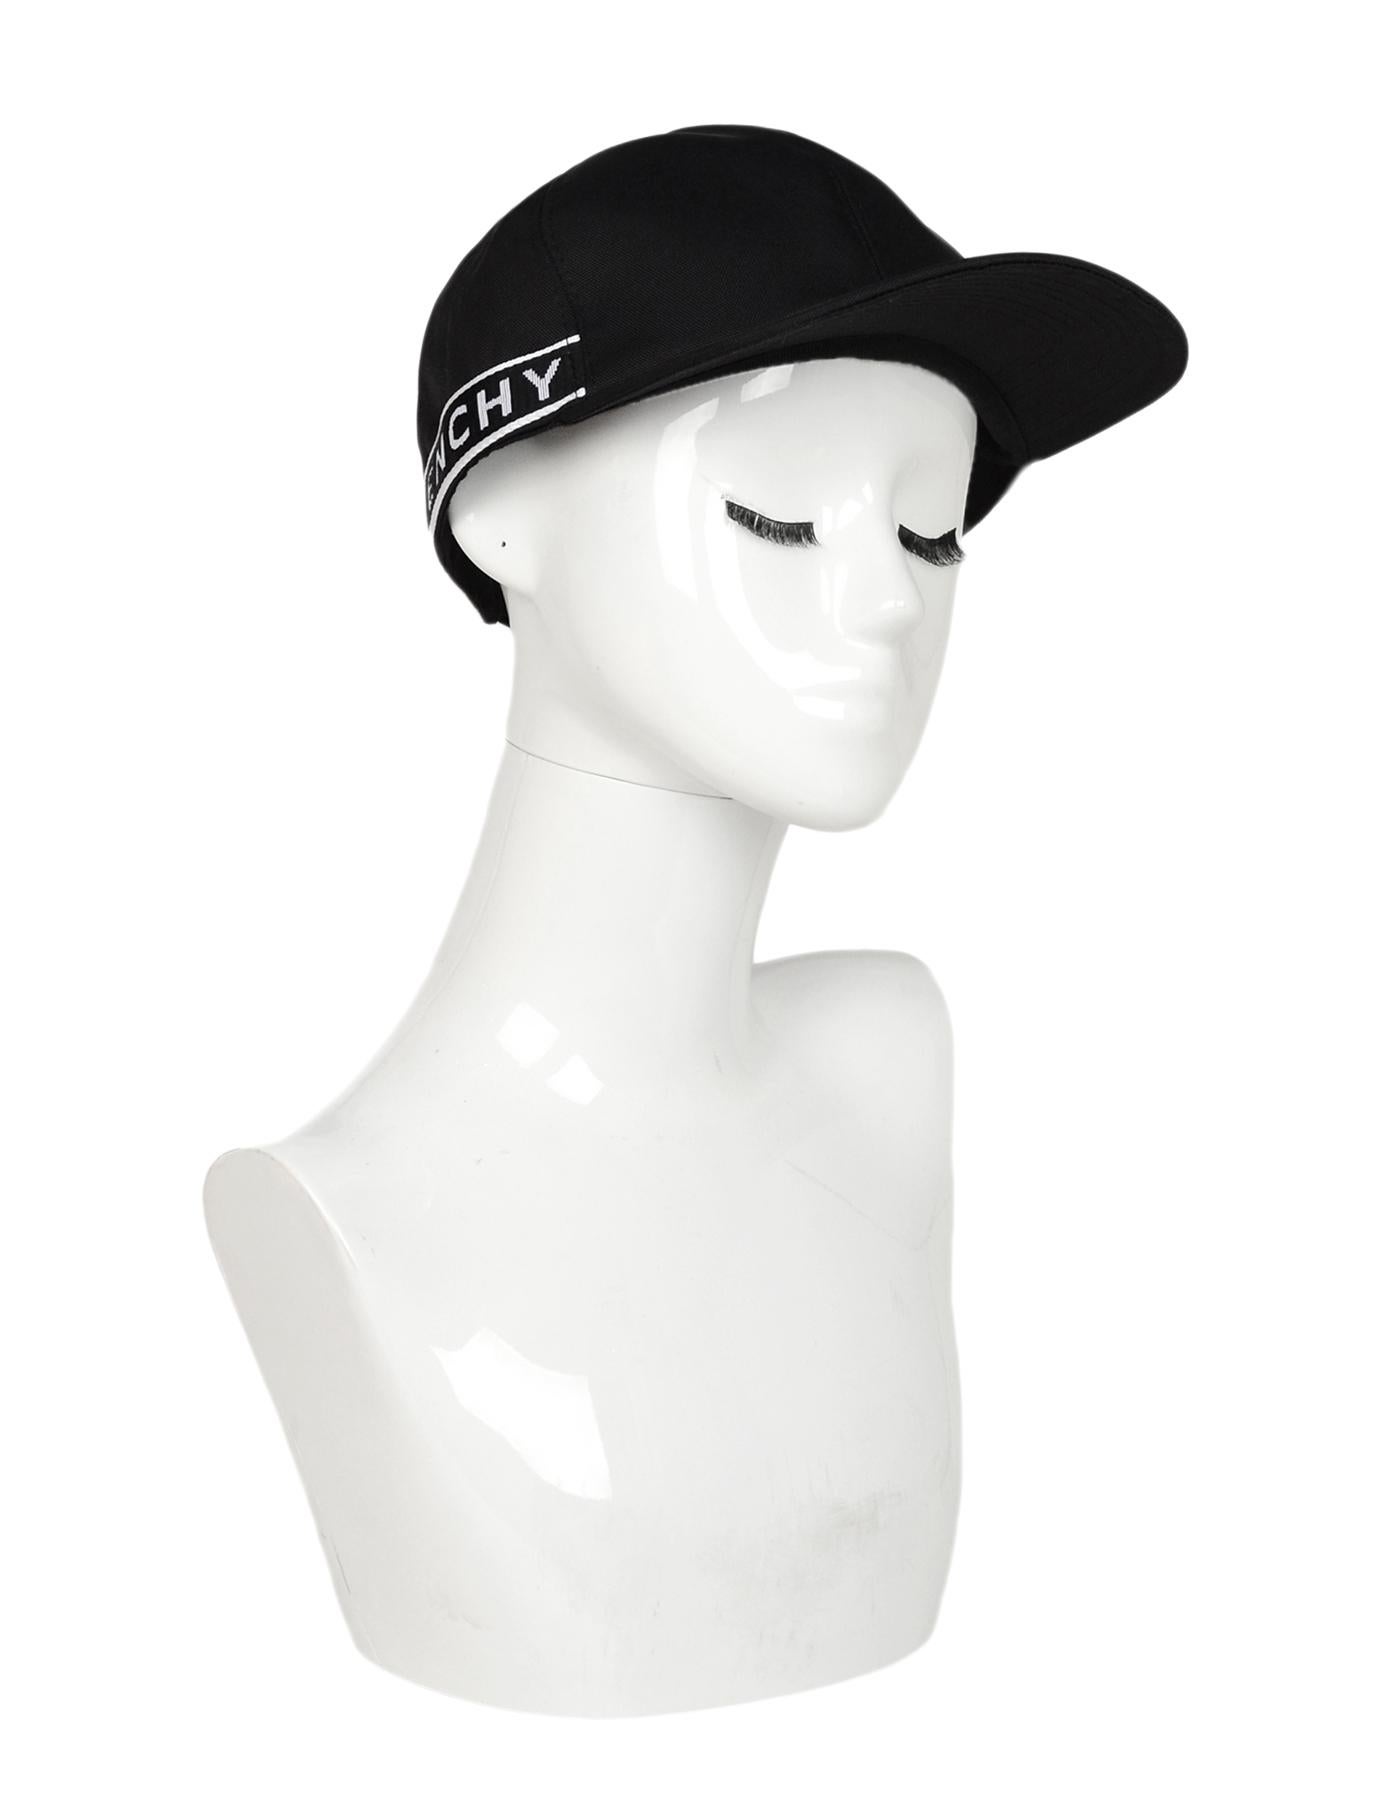 Givenchy Men's Black 4G Side Strap Baseball Cap

Made In: Italy
Color: Black/white
Hardware: Silvertone
Materials: 66% PA (polyacrylic), 26% CO (cotton), 8% PU (polyurethane)
Lining: 100% cotton
Closure/Opening: Velcro strap back
Overall Condition: